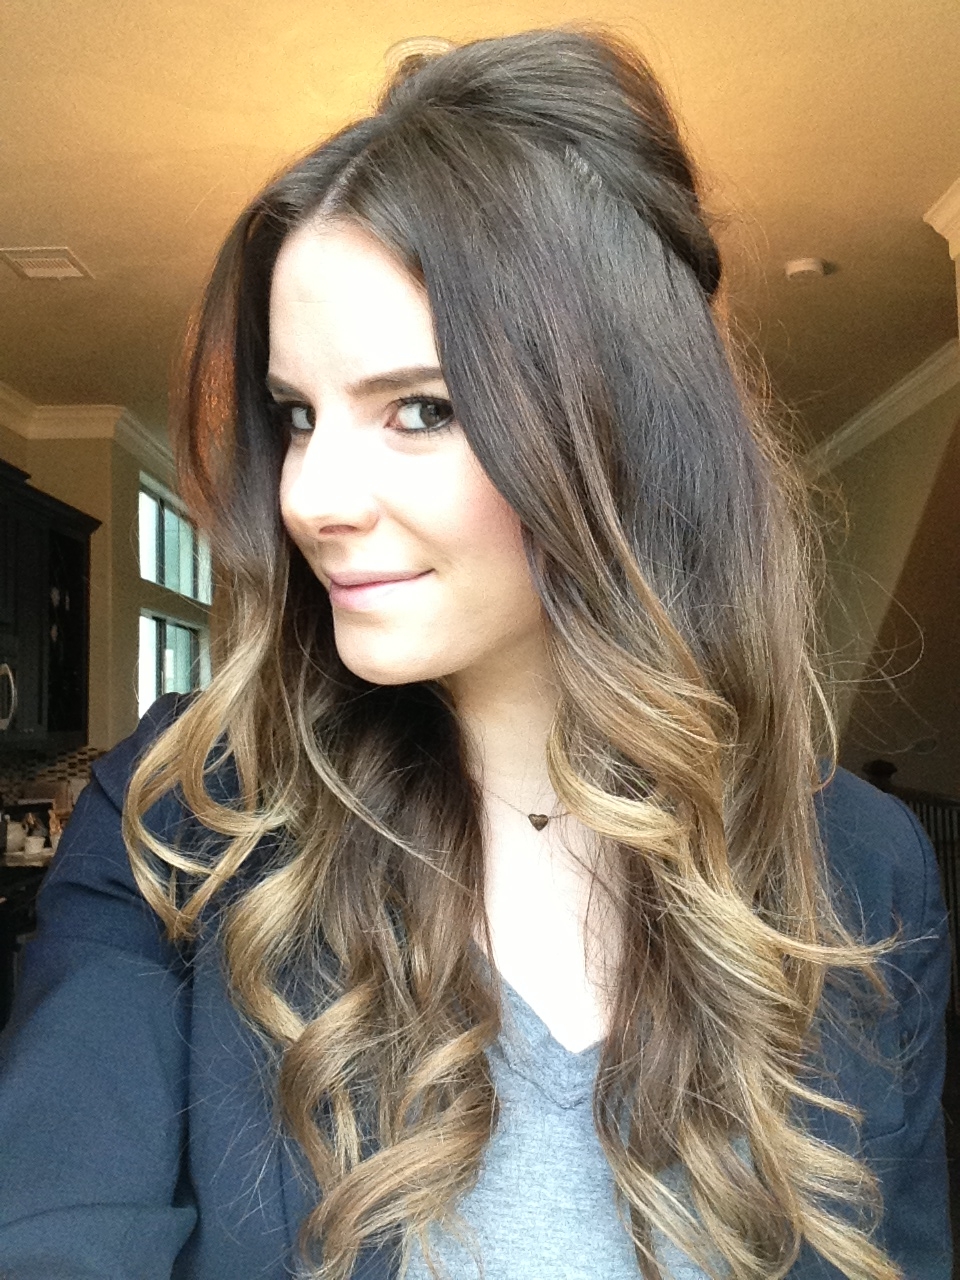 ... Blushing: Creating A "Pretty Little Liars" Inspired Hairstyle